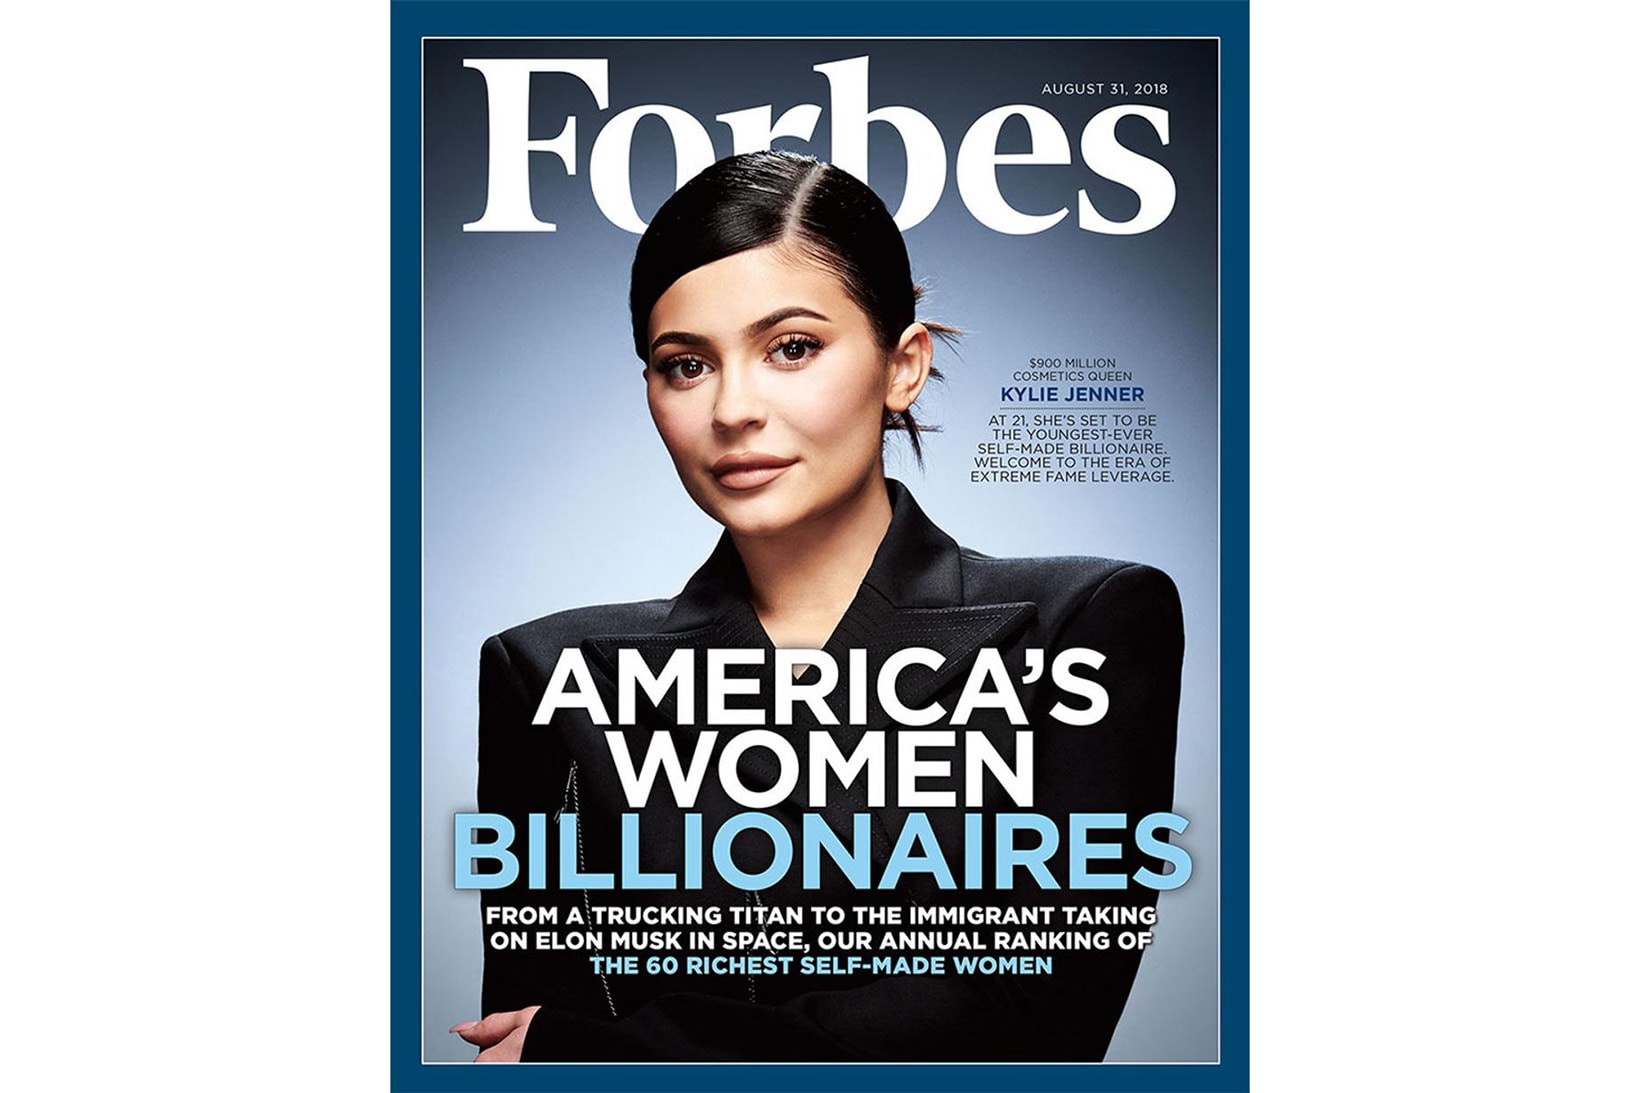 Kylie Jenner Cosmetics Net Worth Income Forbes Magazine Cover Interview August 2018 Billionaire 900 Million USD